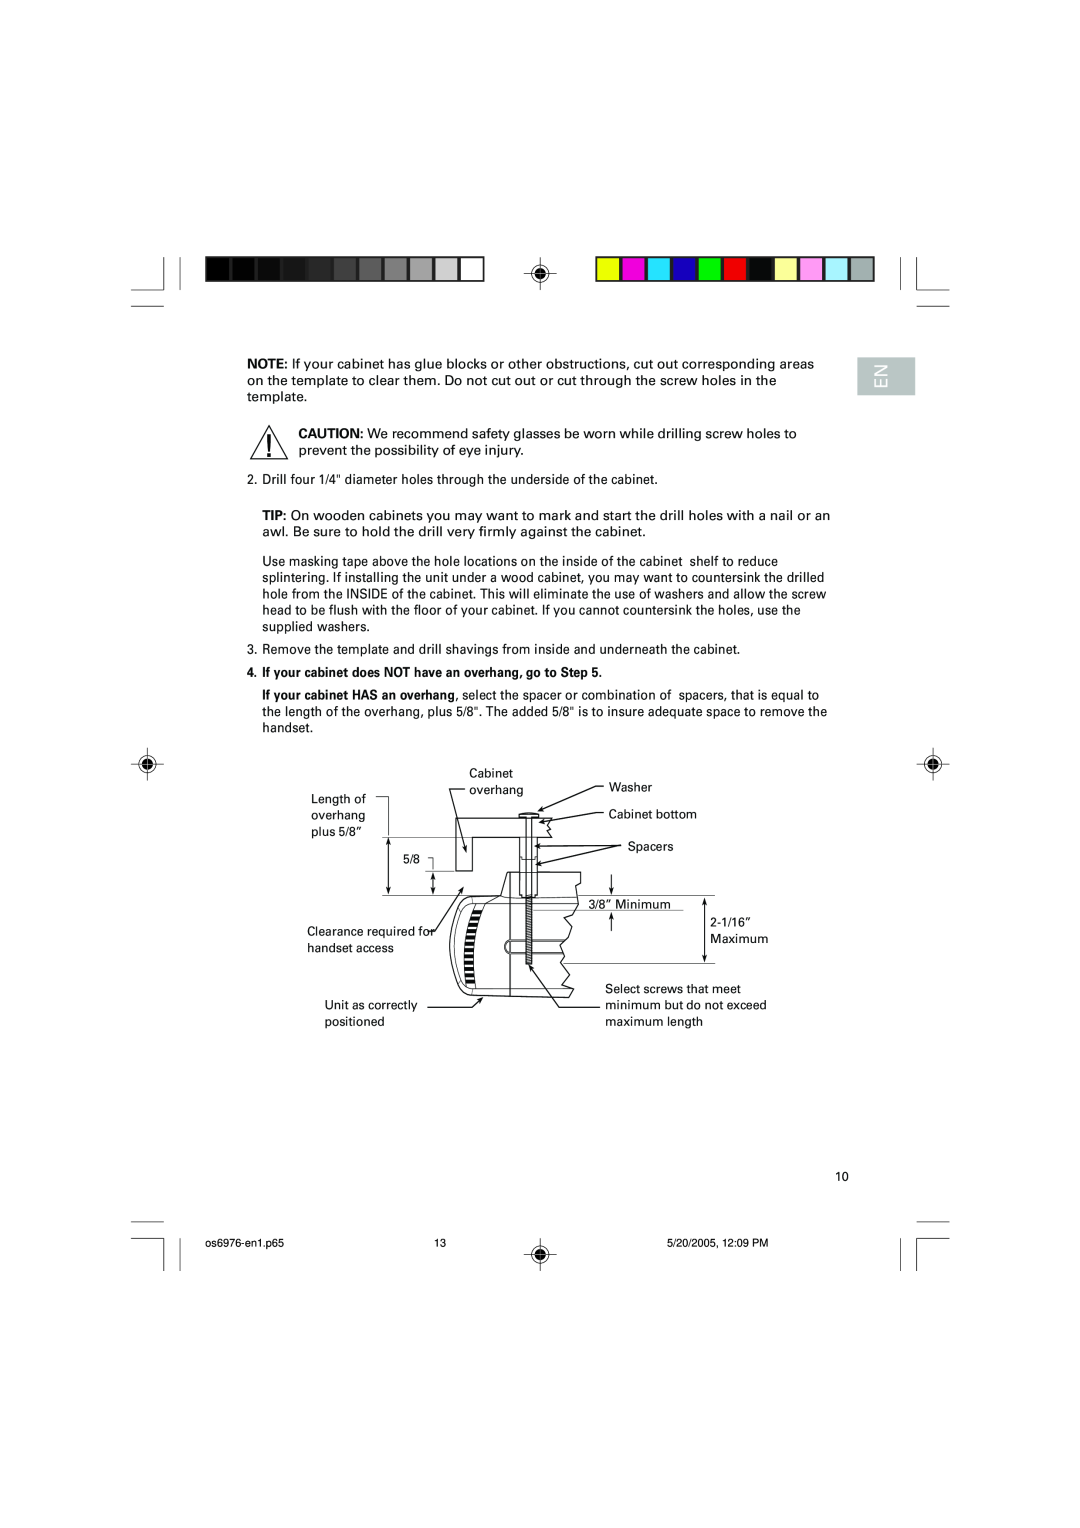 Oregon Scientific OS6976 user manual If your cabinet does NOT have an overhang, go to Step 